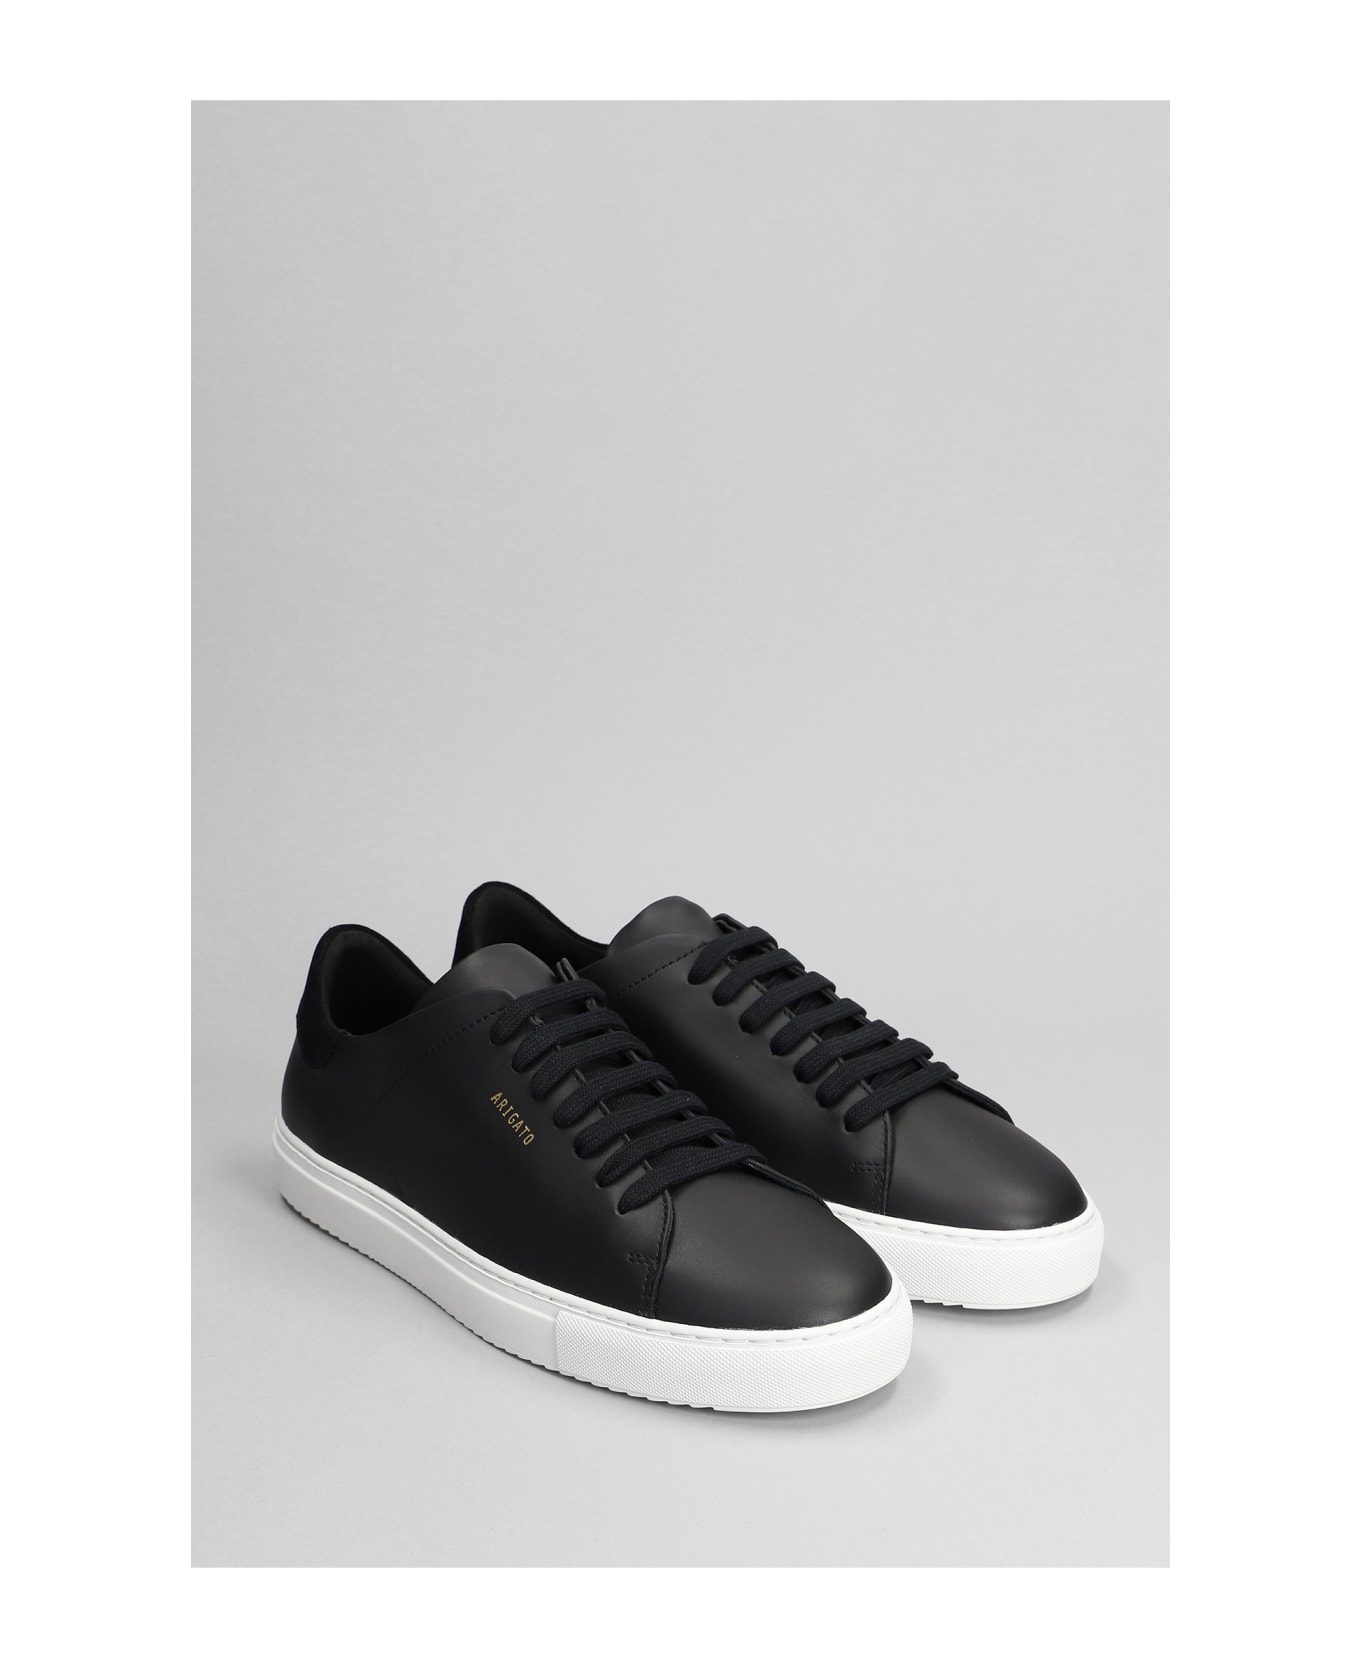 Axel Arigato Clean 90 Sneakers In Black Suede And Leather - Nero bianco